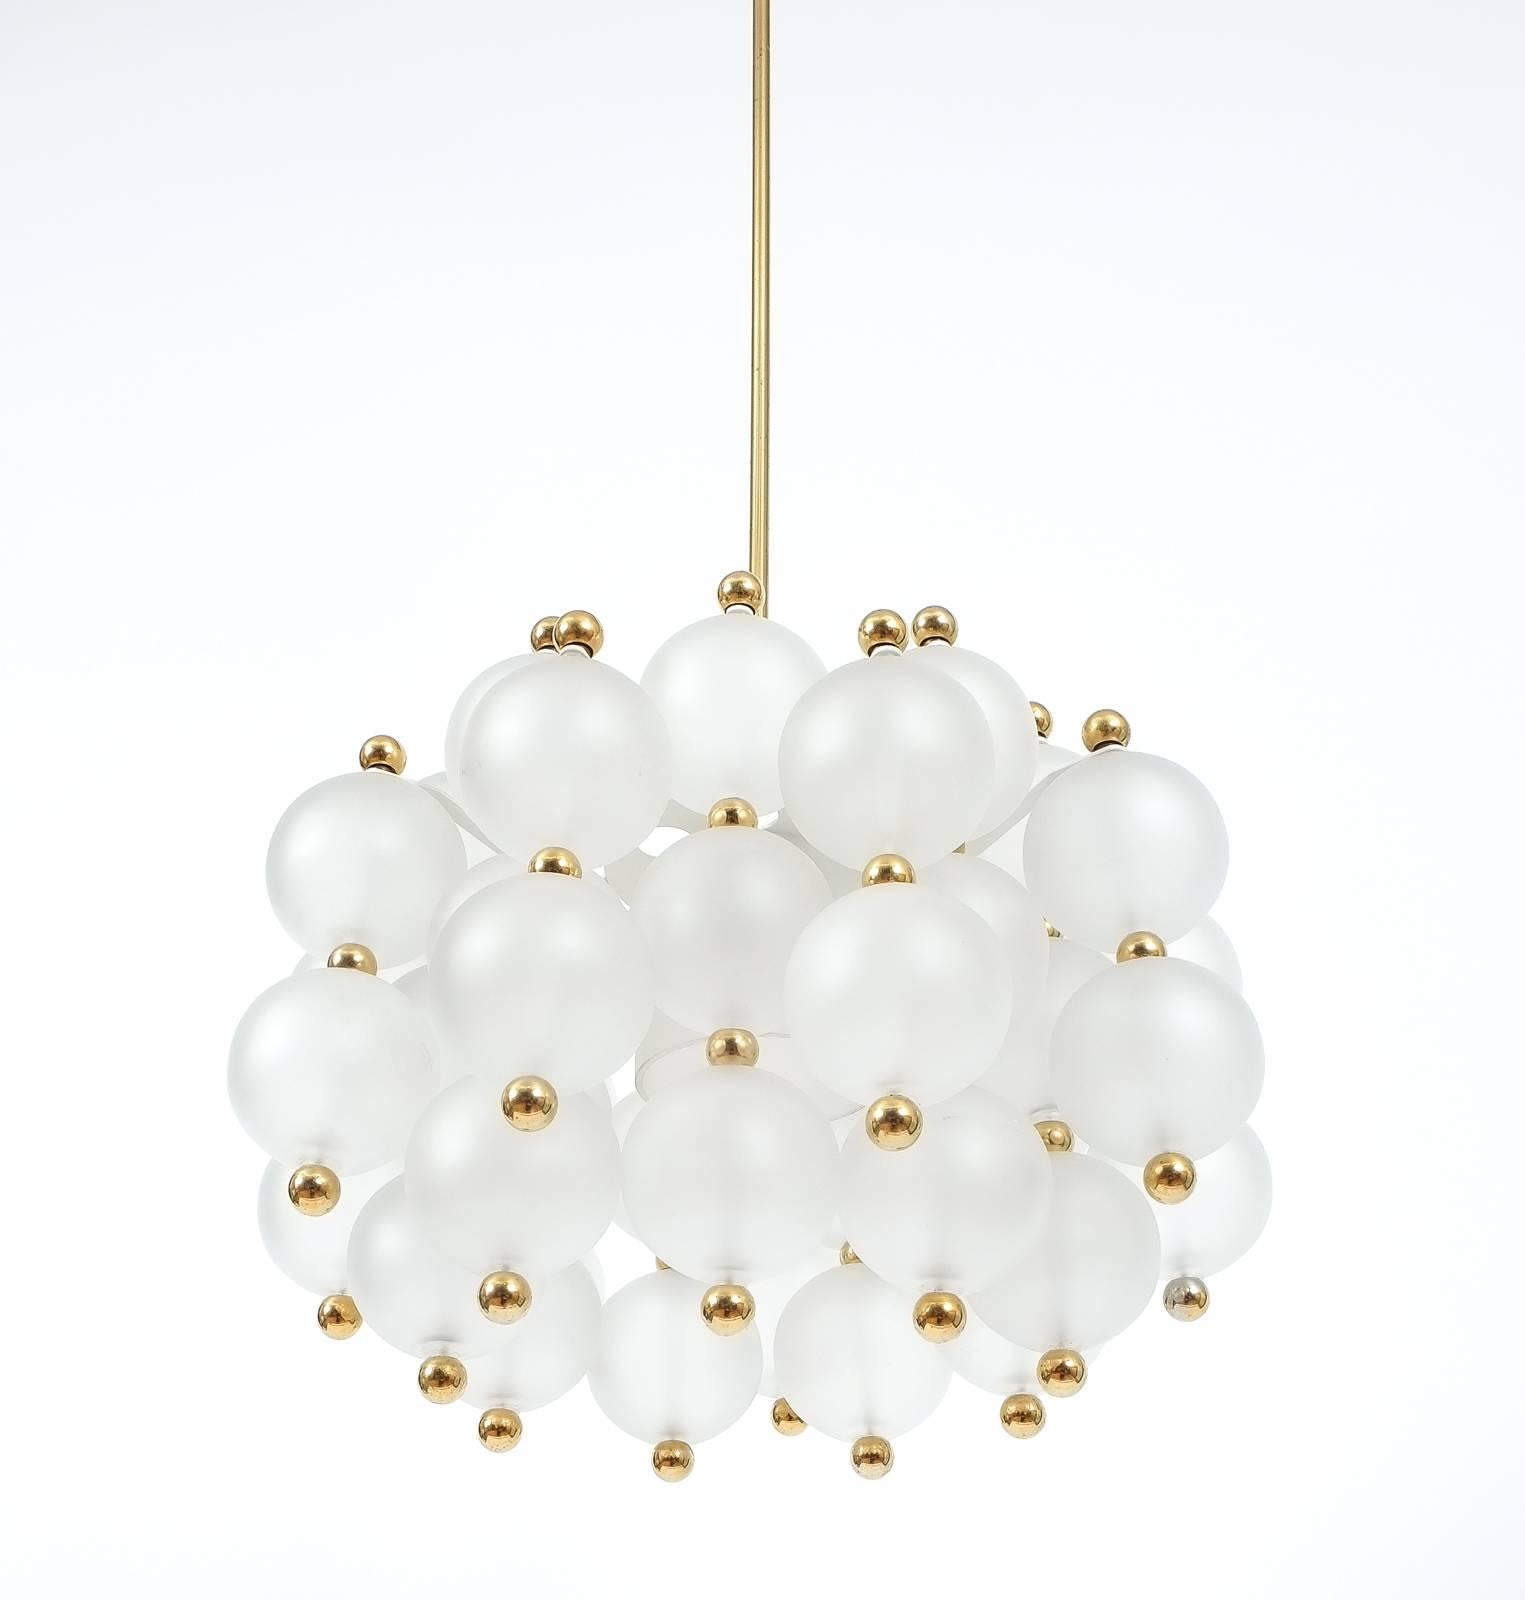 Large opaline glass chandelier by Kinkeldey, Germany, late mid-century.

Glass chandelier by Kinkeldey, circa 1980. Beautiful and large chandelier with a multitude of smooth translucent handblown glass balls with golden brass knobs. The fixture is